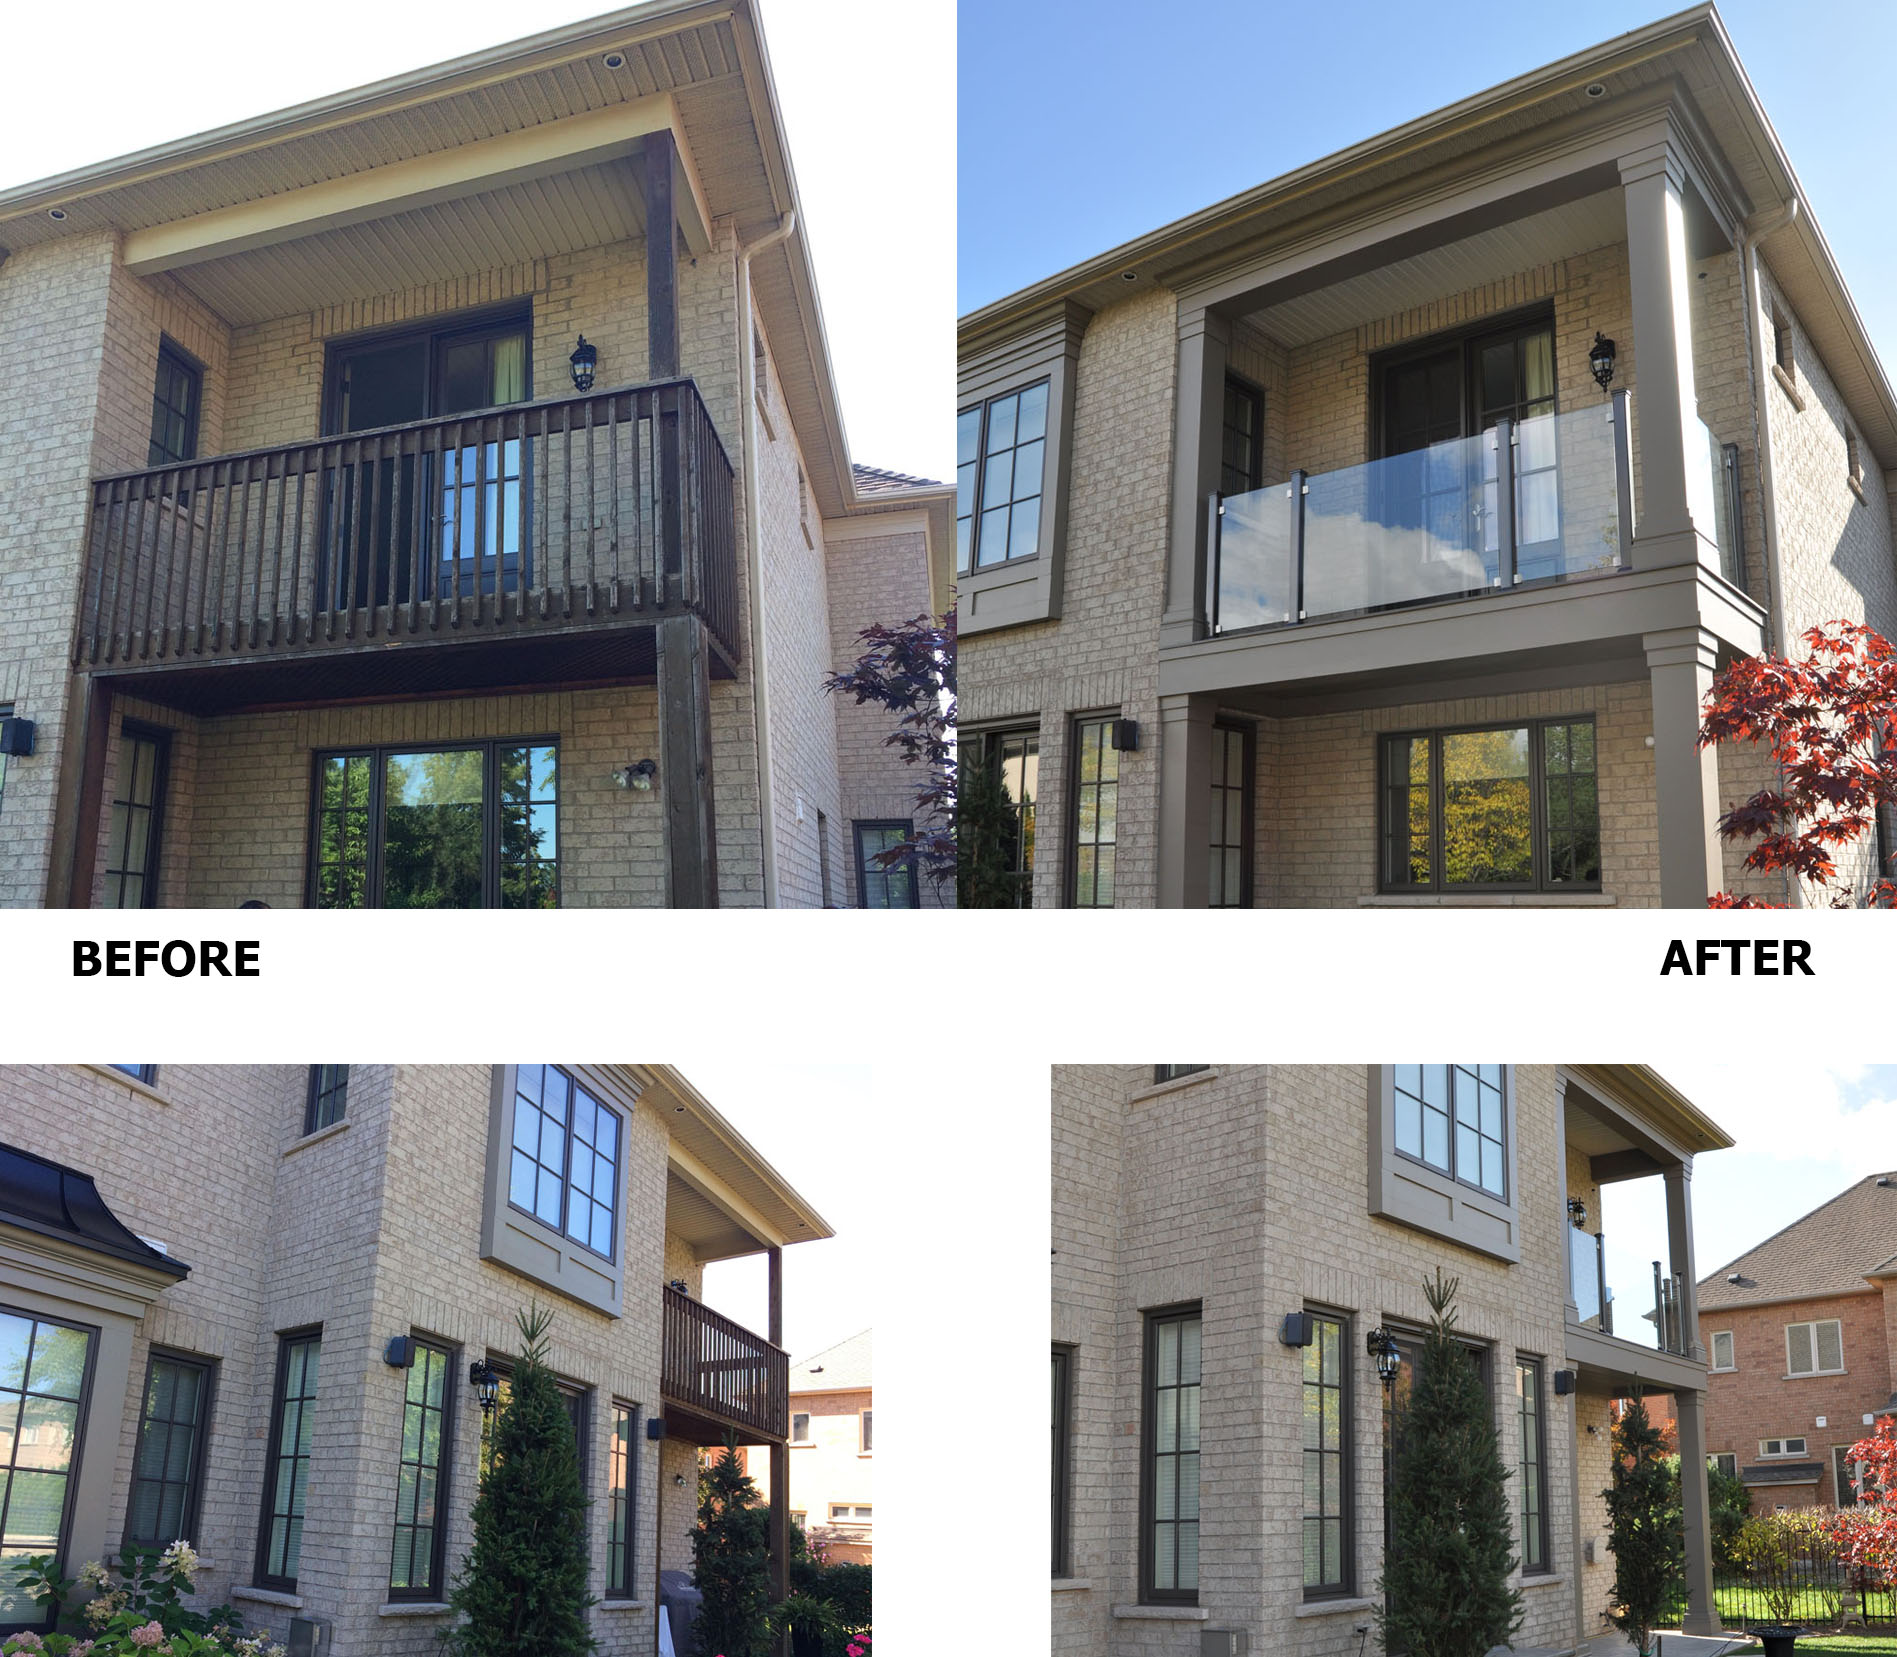 Before and after a balcony transformation.